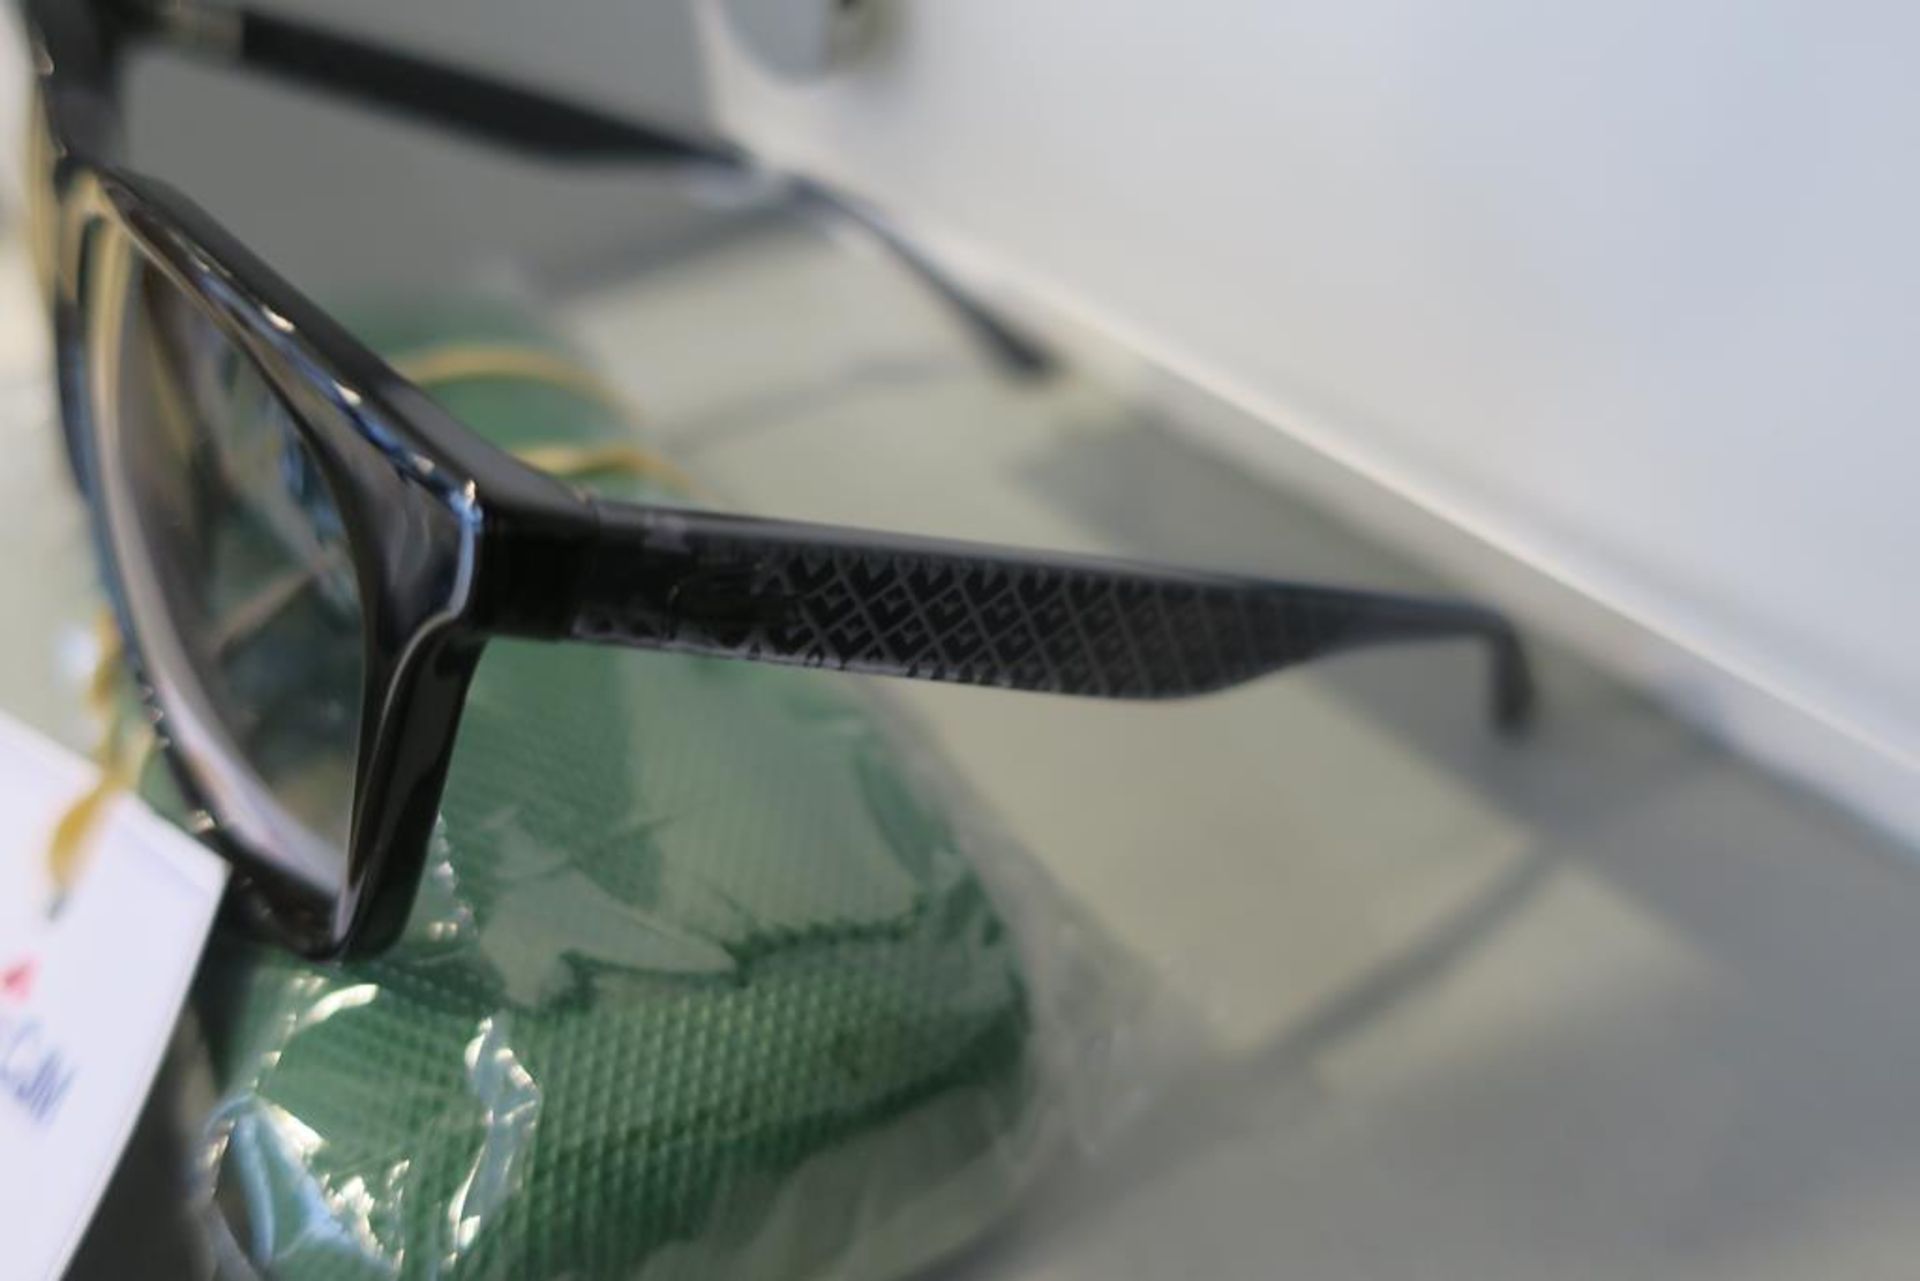 Pair of Lacoste Sunglasses - Image 2 of 2